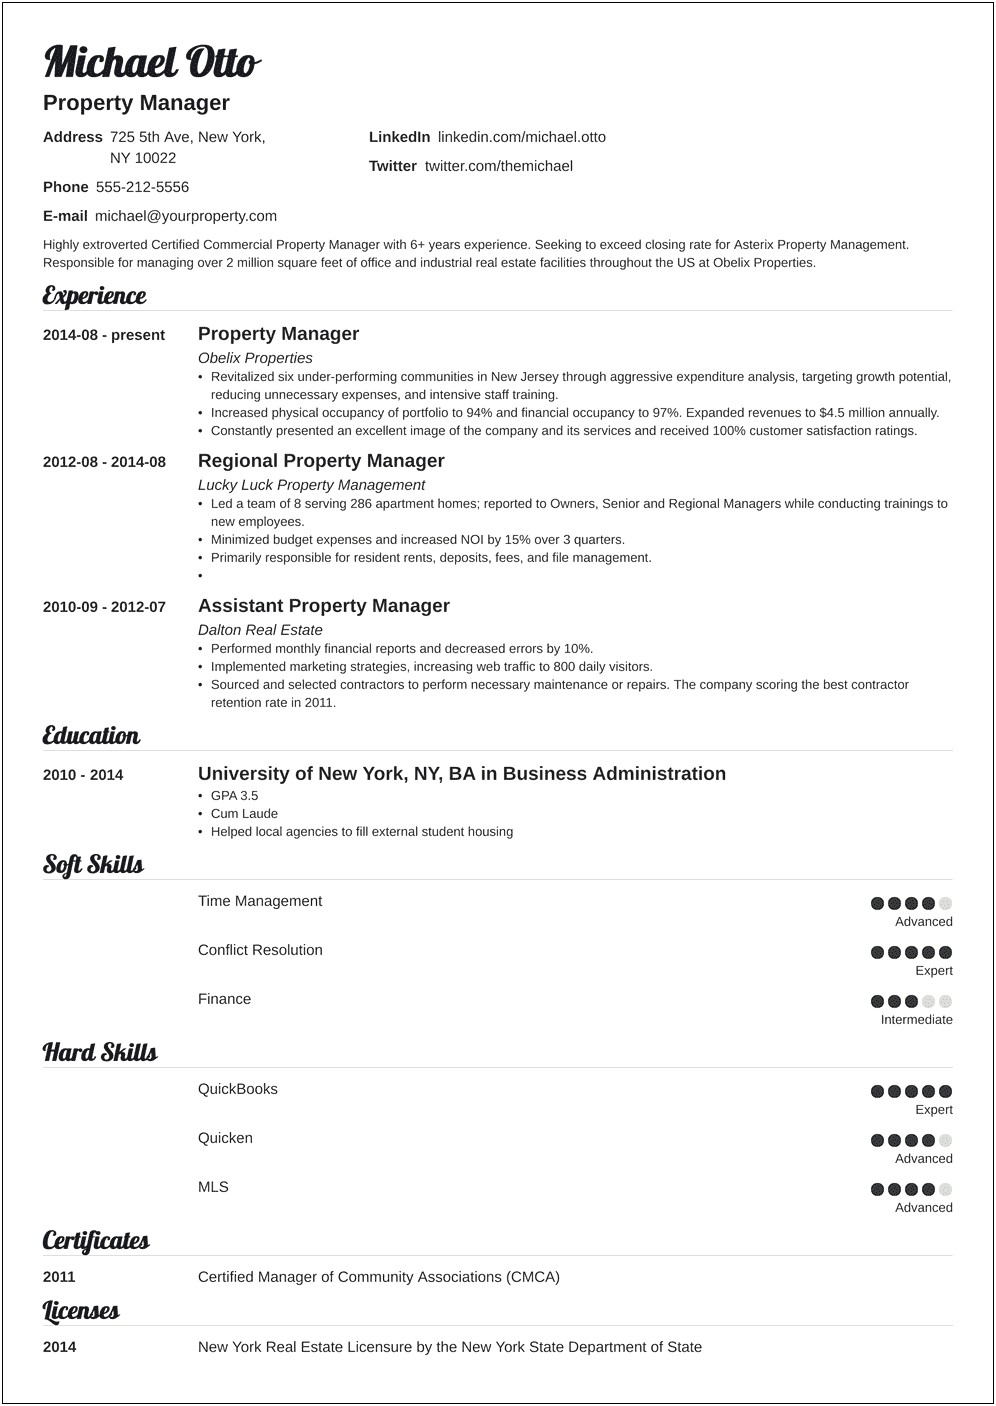 Sample Resume For An Assistant Property Manager